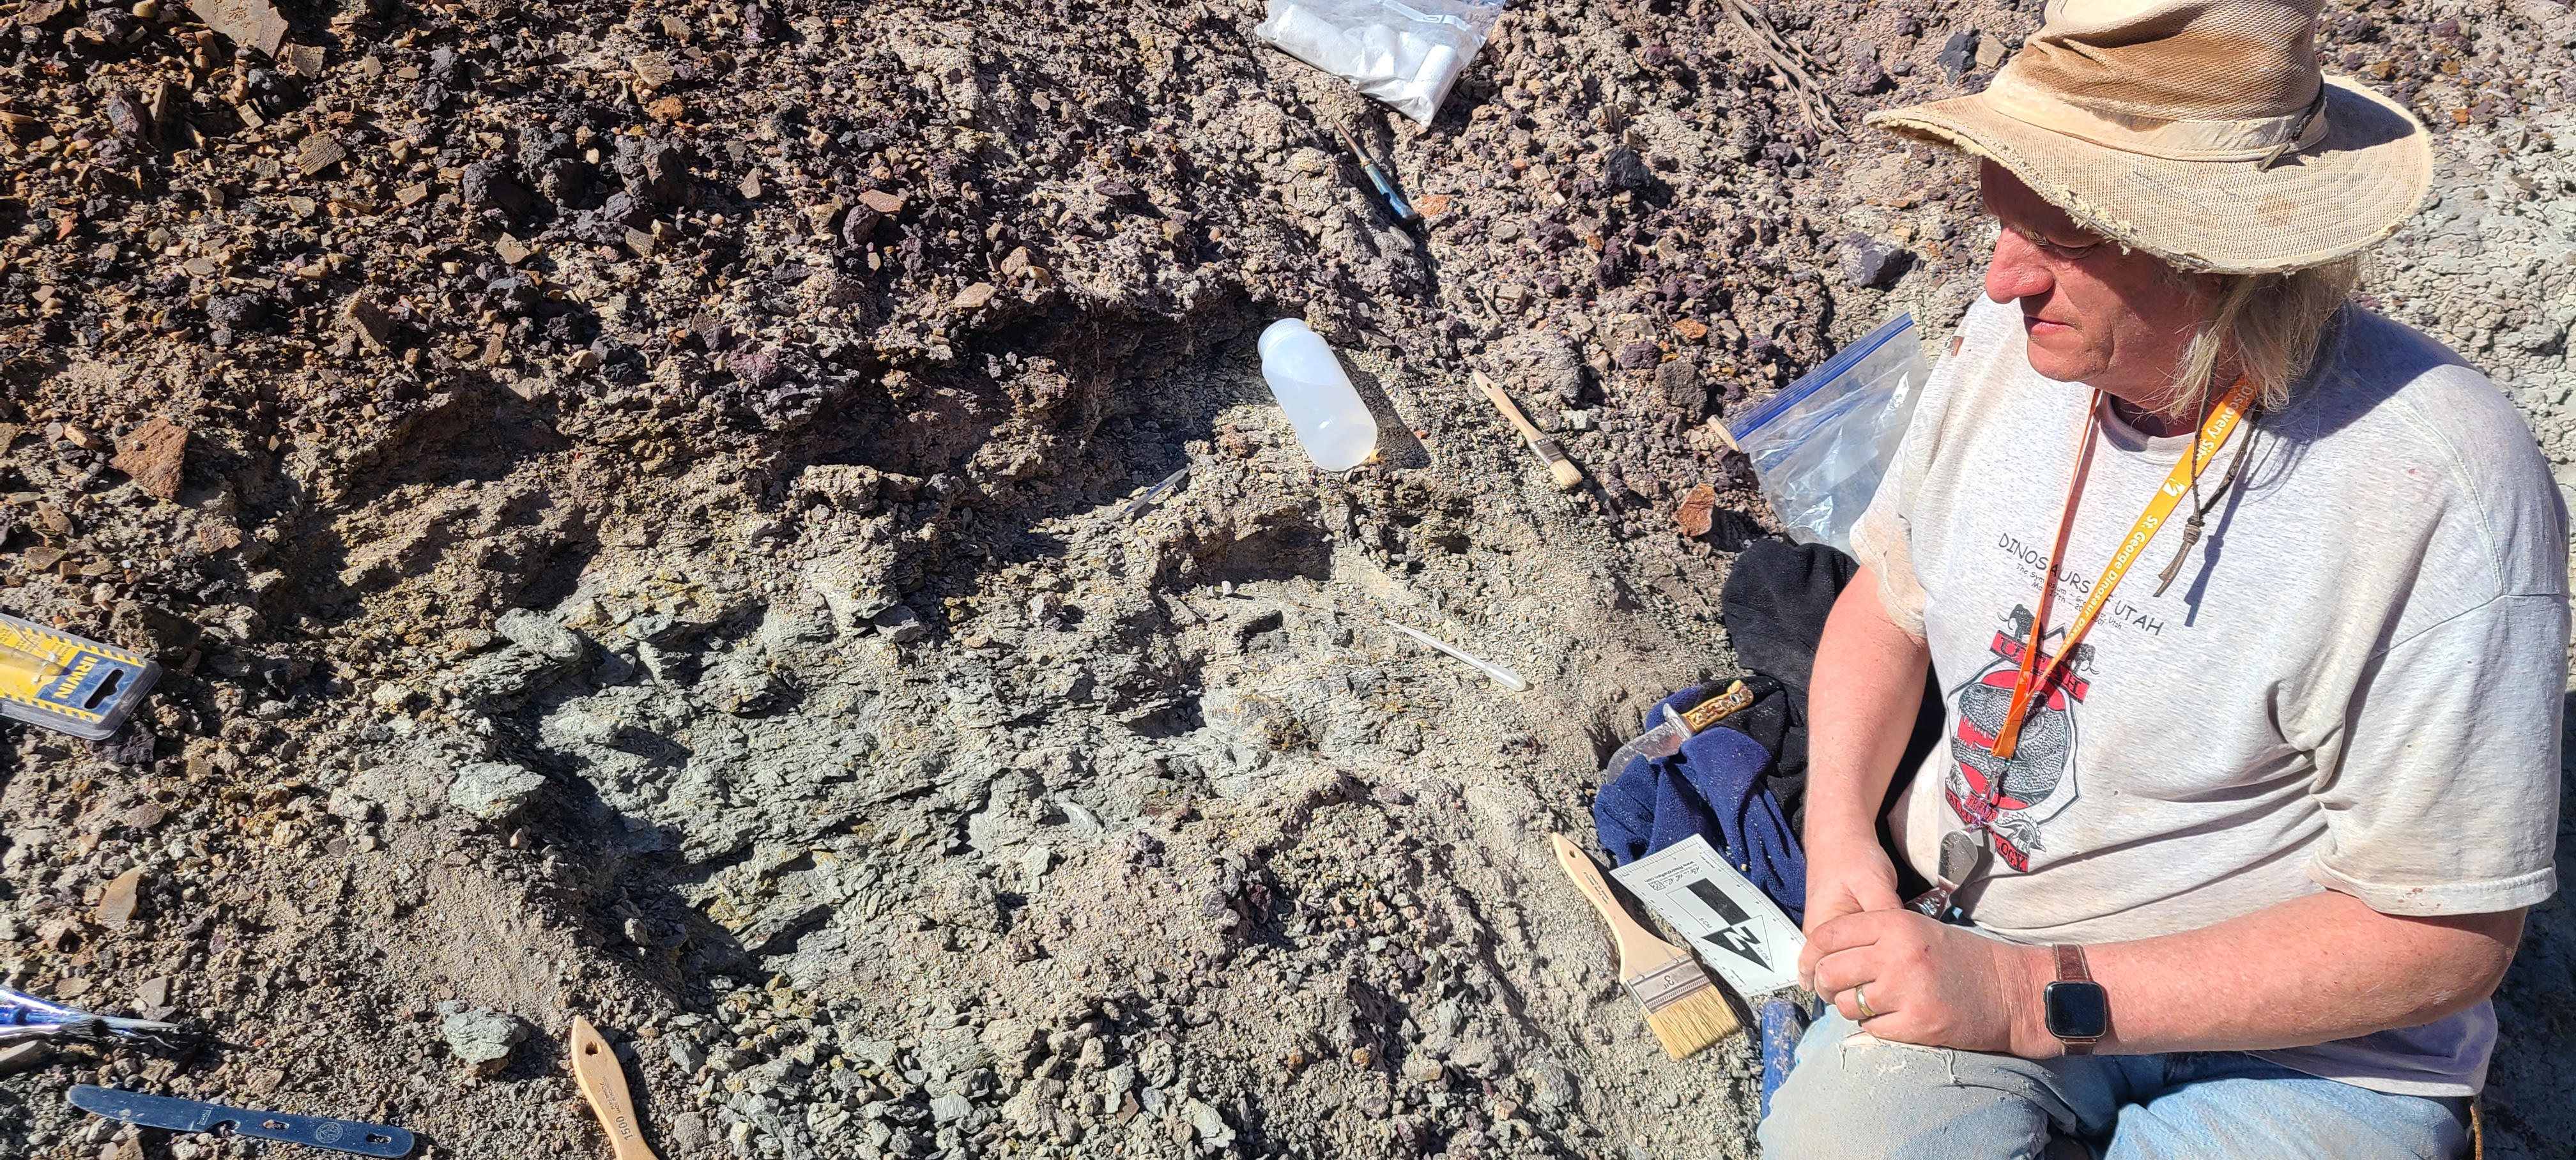 Paleontologist Andrew Milner from the St. George Dinosaur Discovery Site looks at phytosaur bones found in the Chinle Formation.